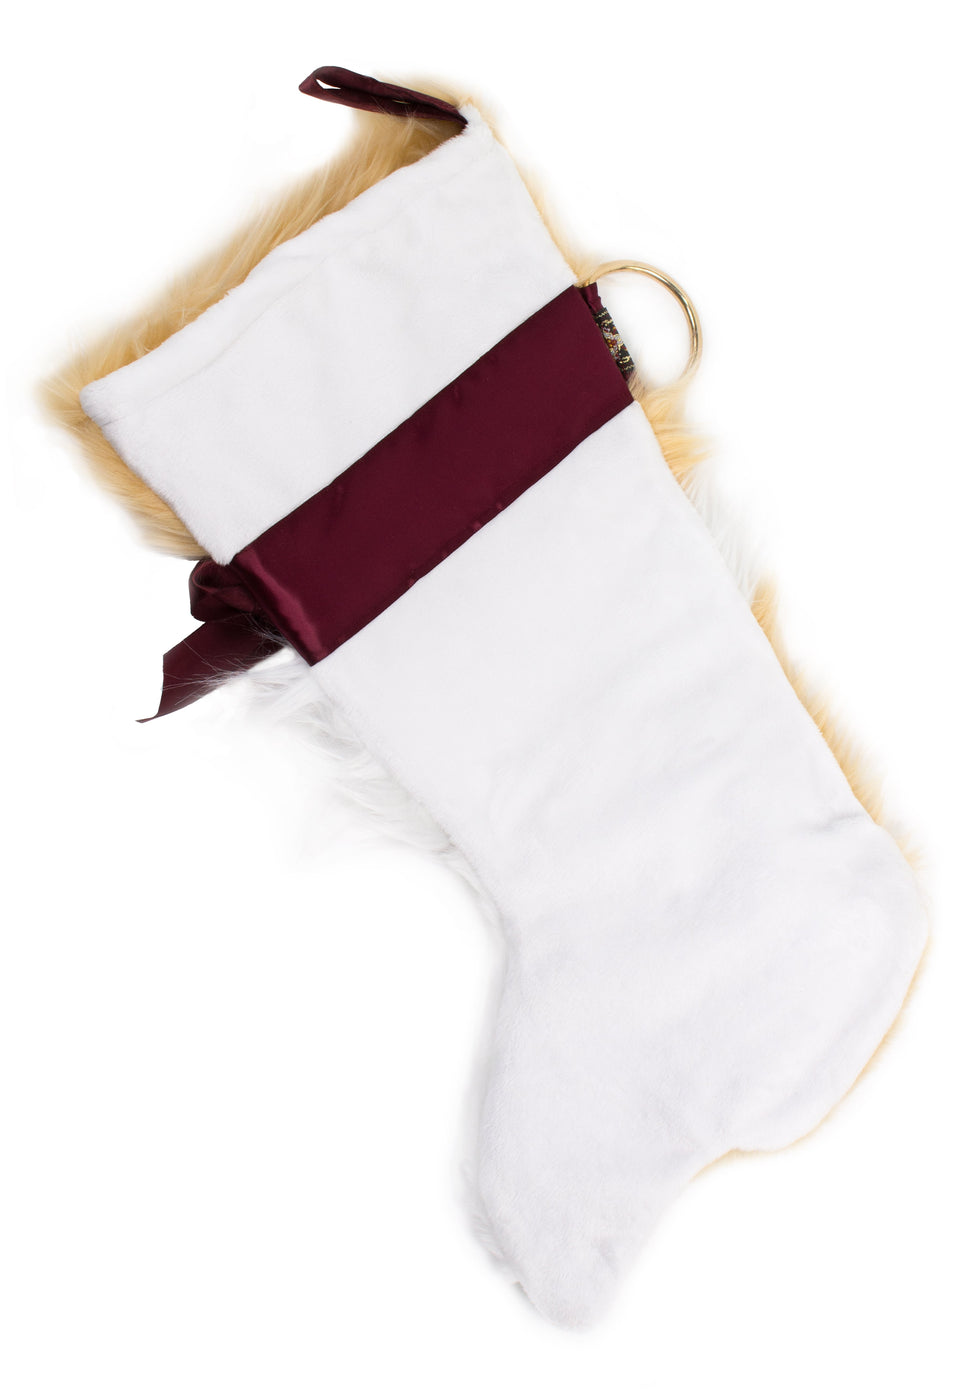 This Corgi shaped dog Christmas stocking is perfect for stuffing toys and treats into to spoil your fur baby for Christmas, or whatever holiday you celebrate!